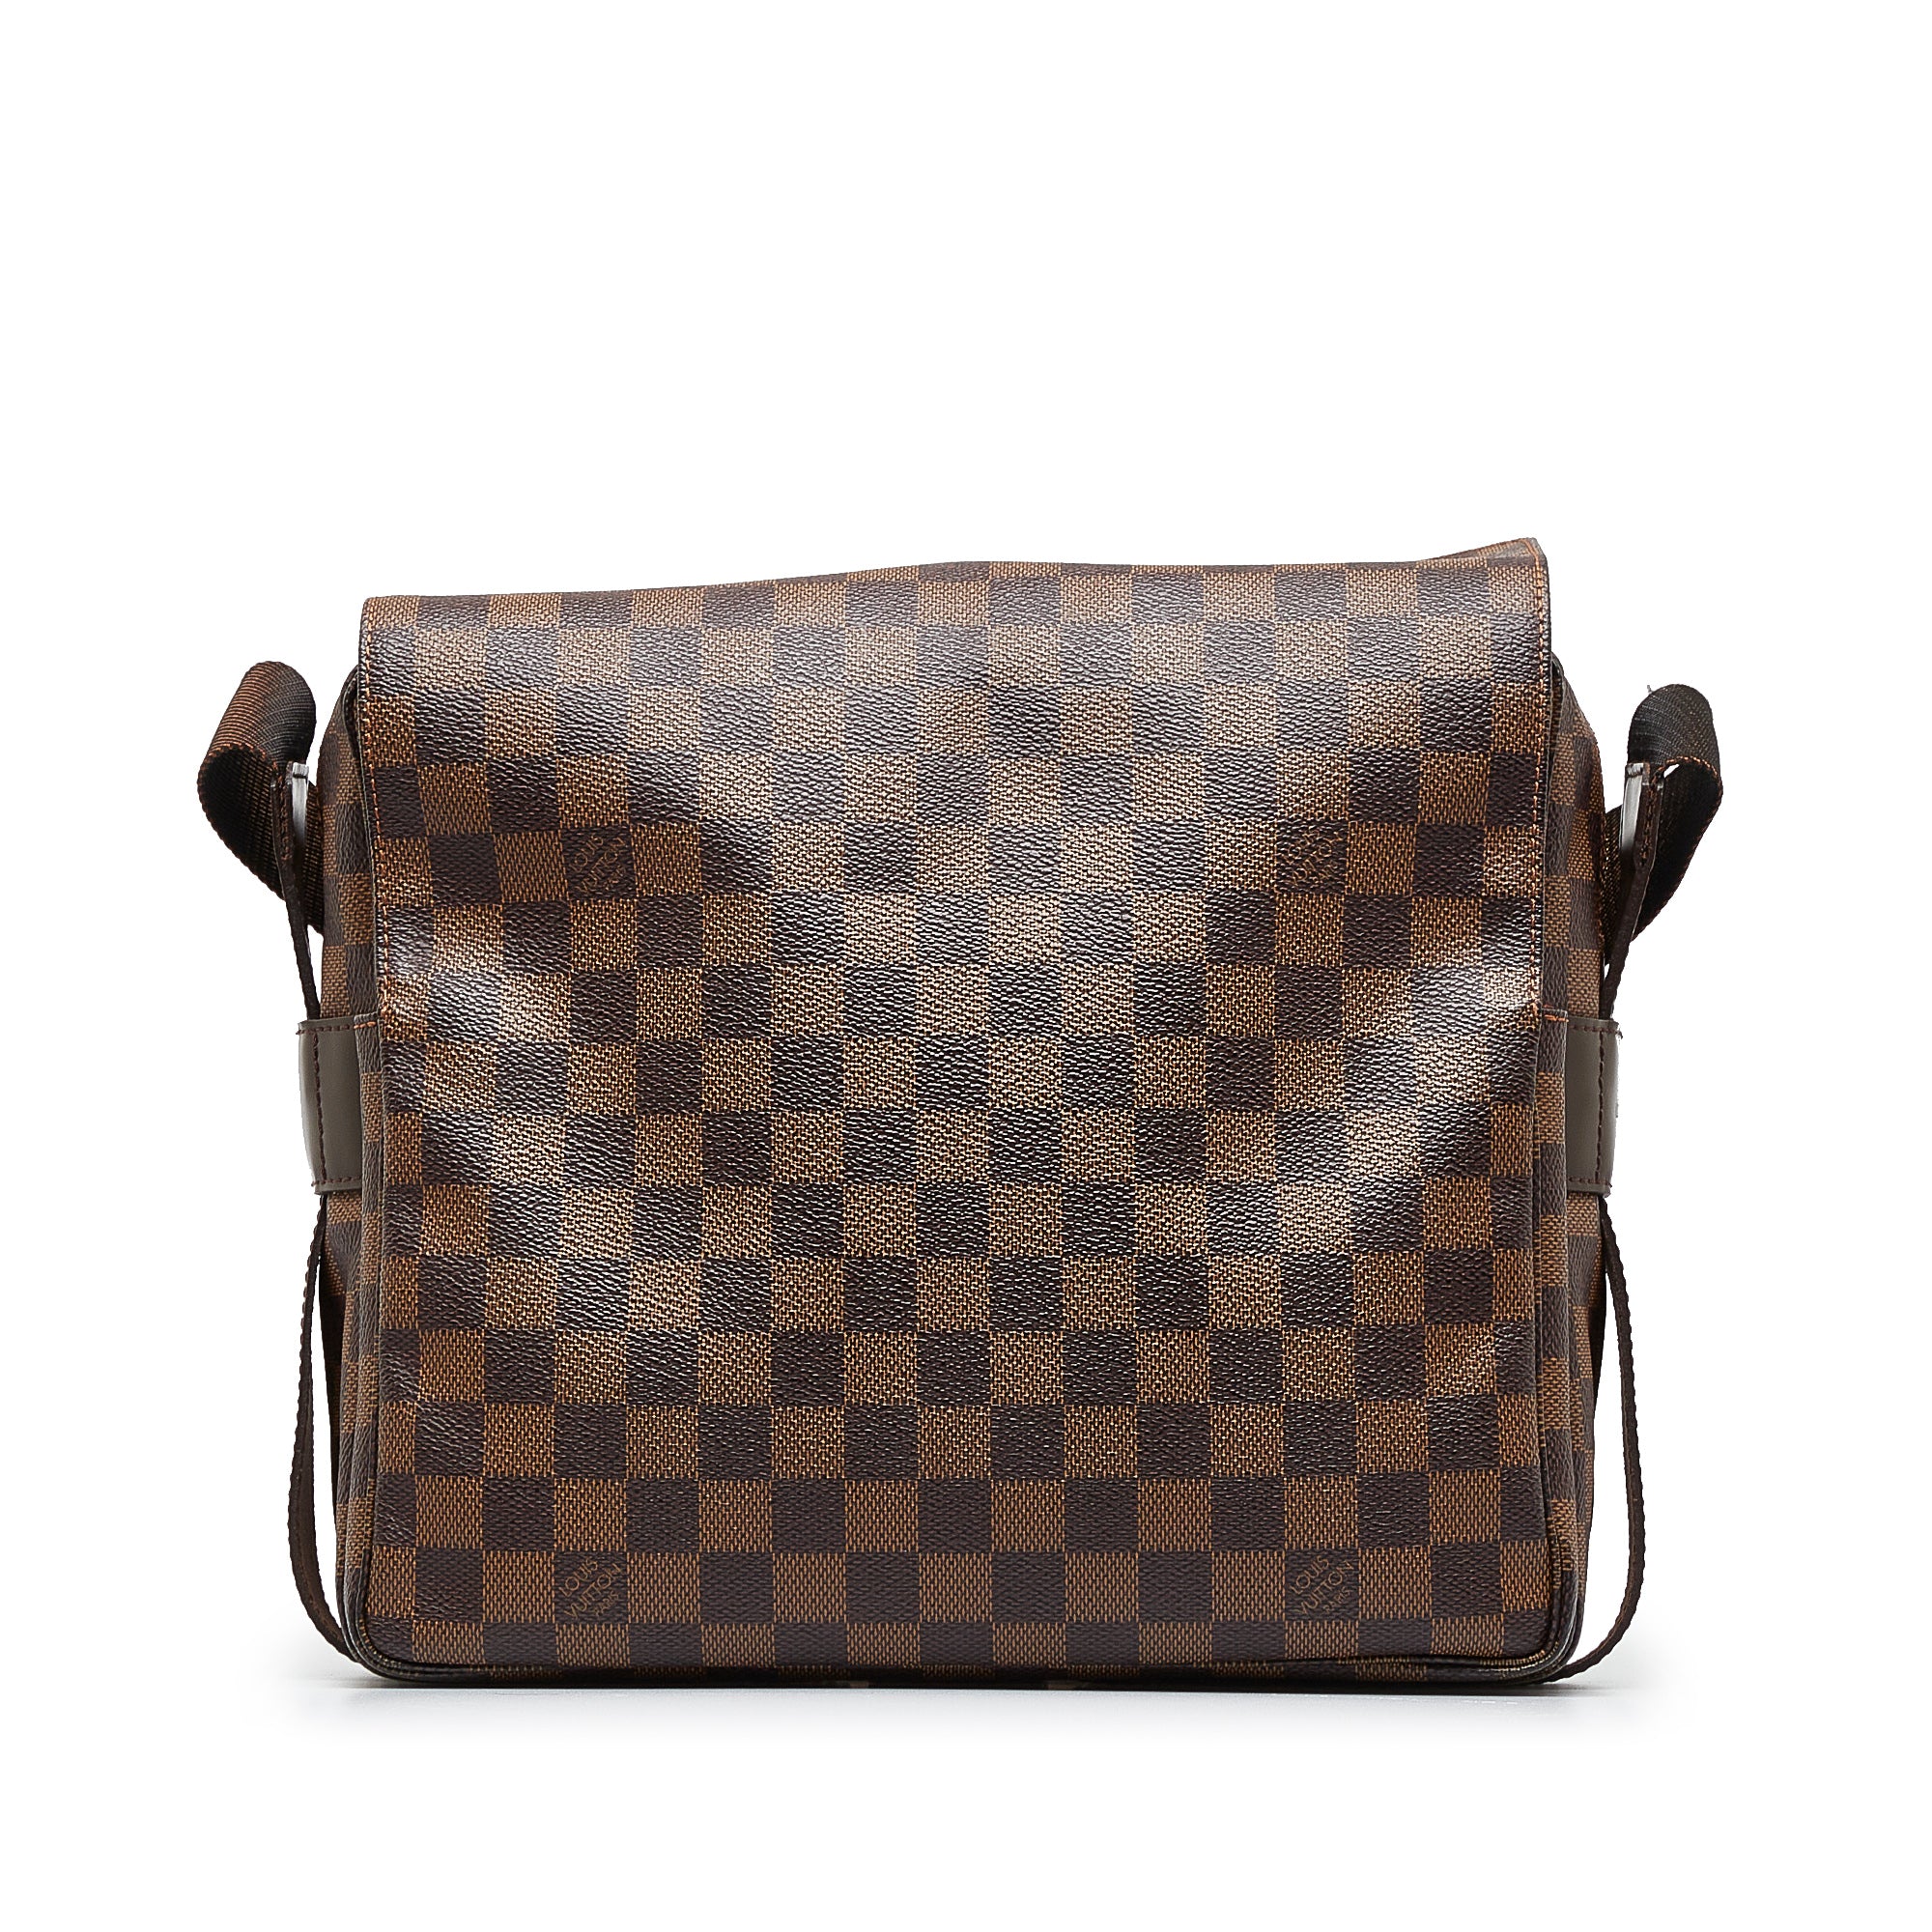 Louis Vuitton Naviglio shoulder bag in brown damier canvas and brown  leather, Cra-wallonieShops Revival